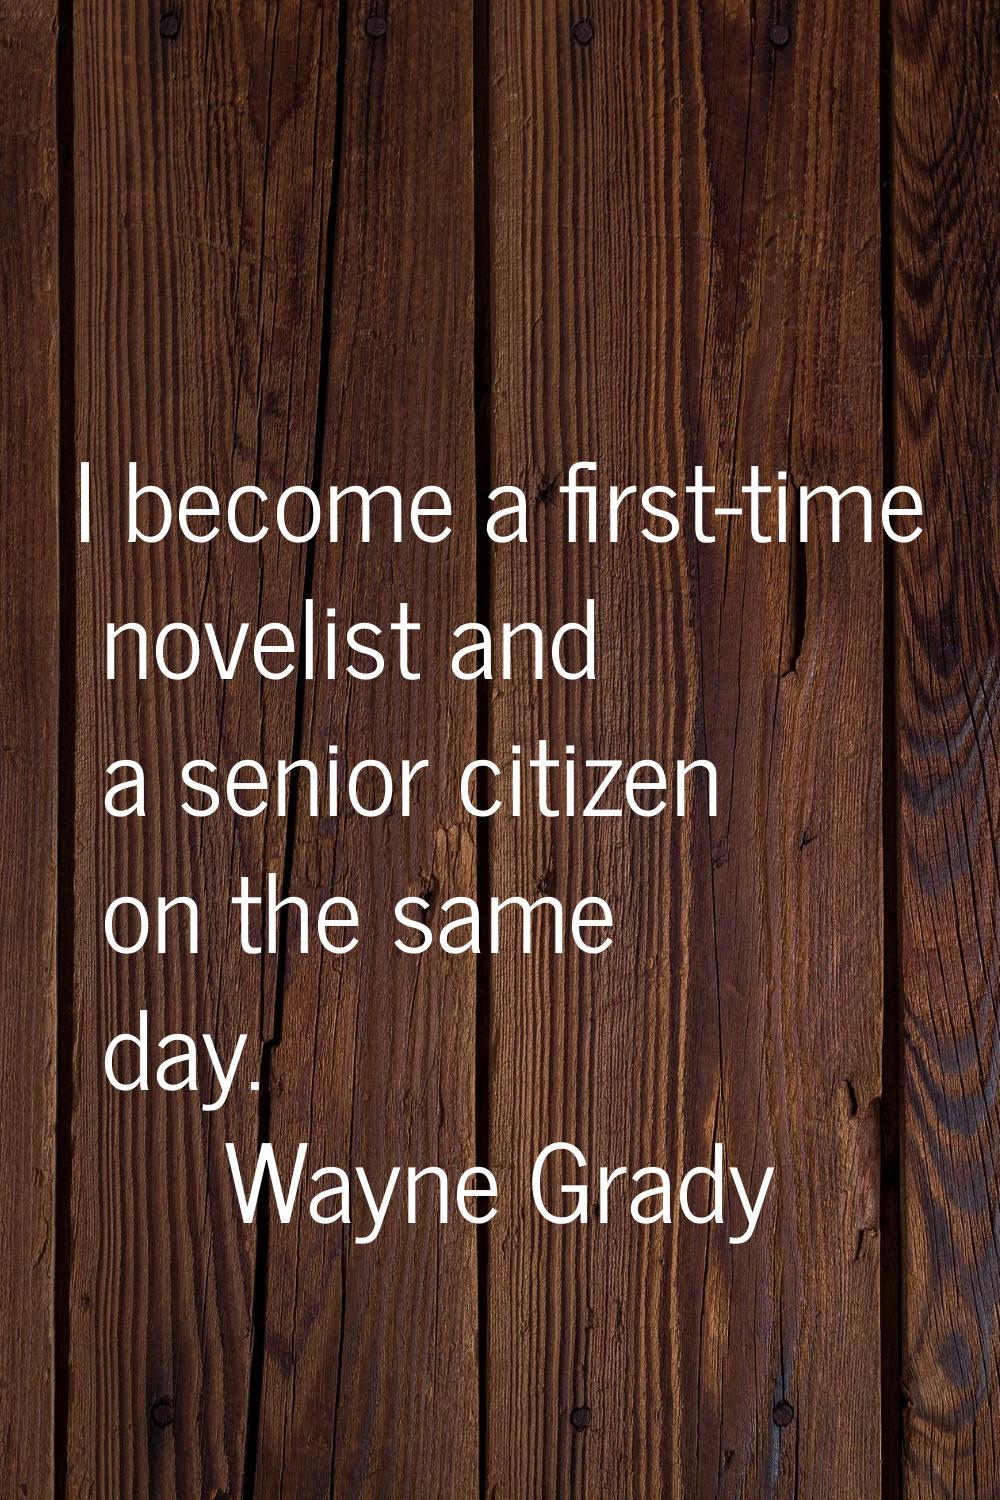 I become a first-time novelist and a senior citizen on the same day.